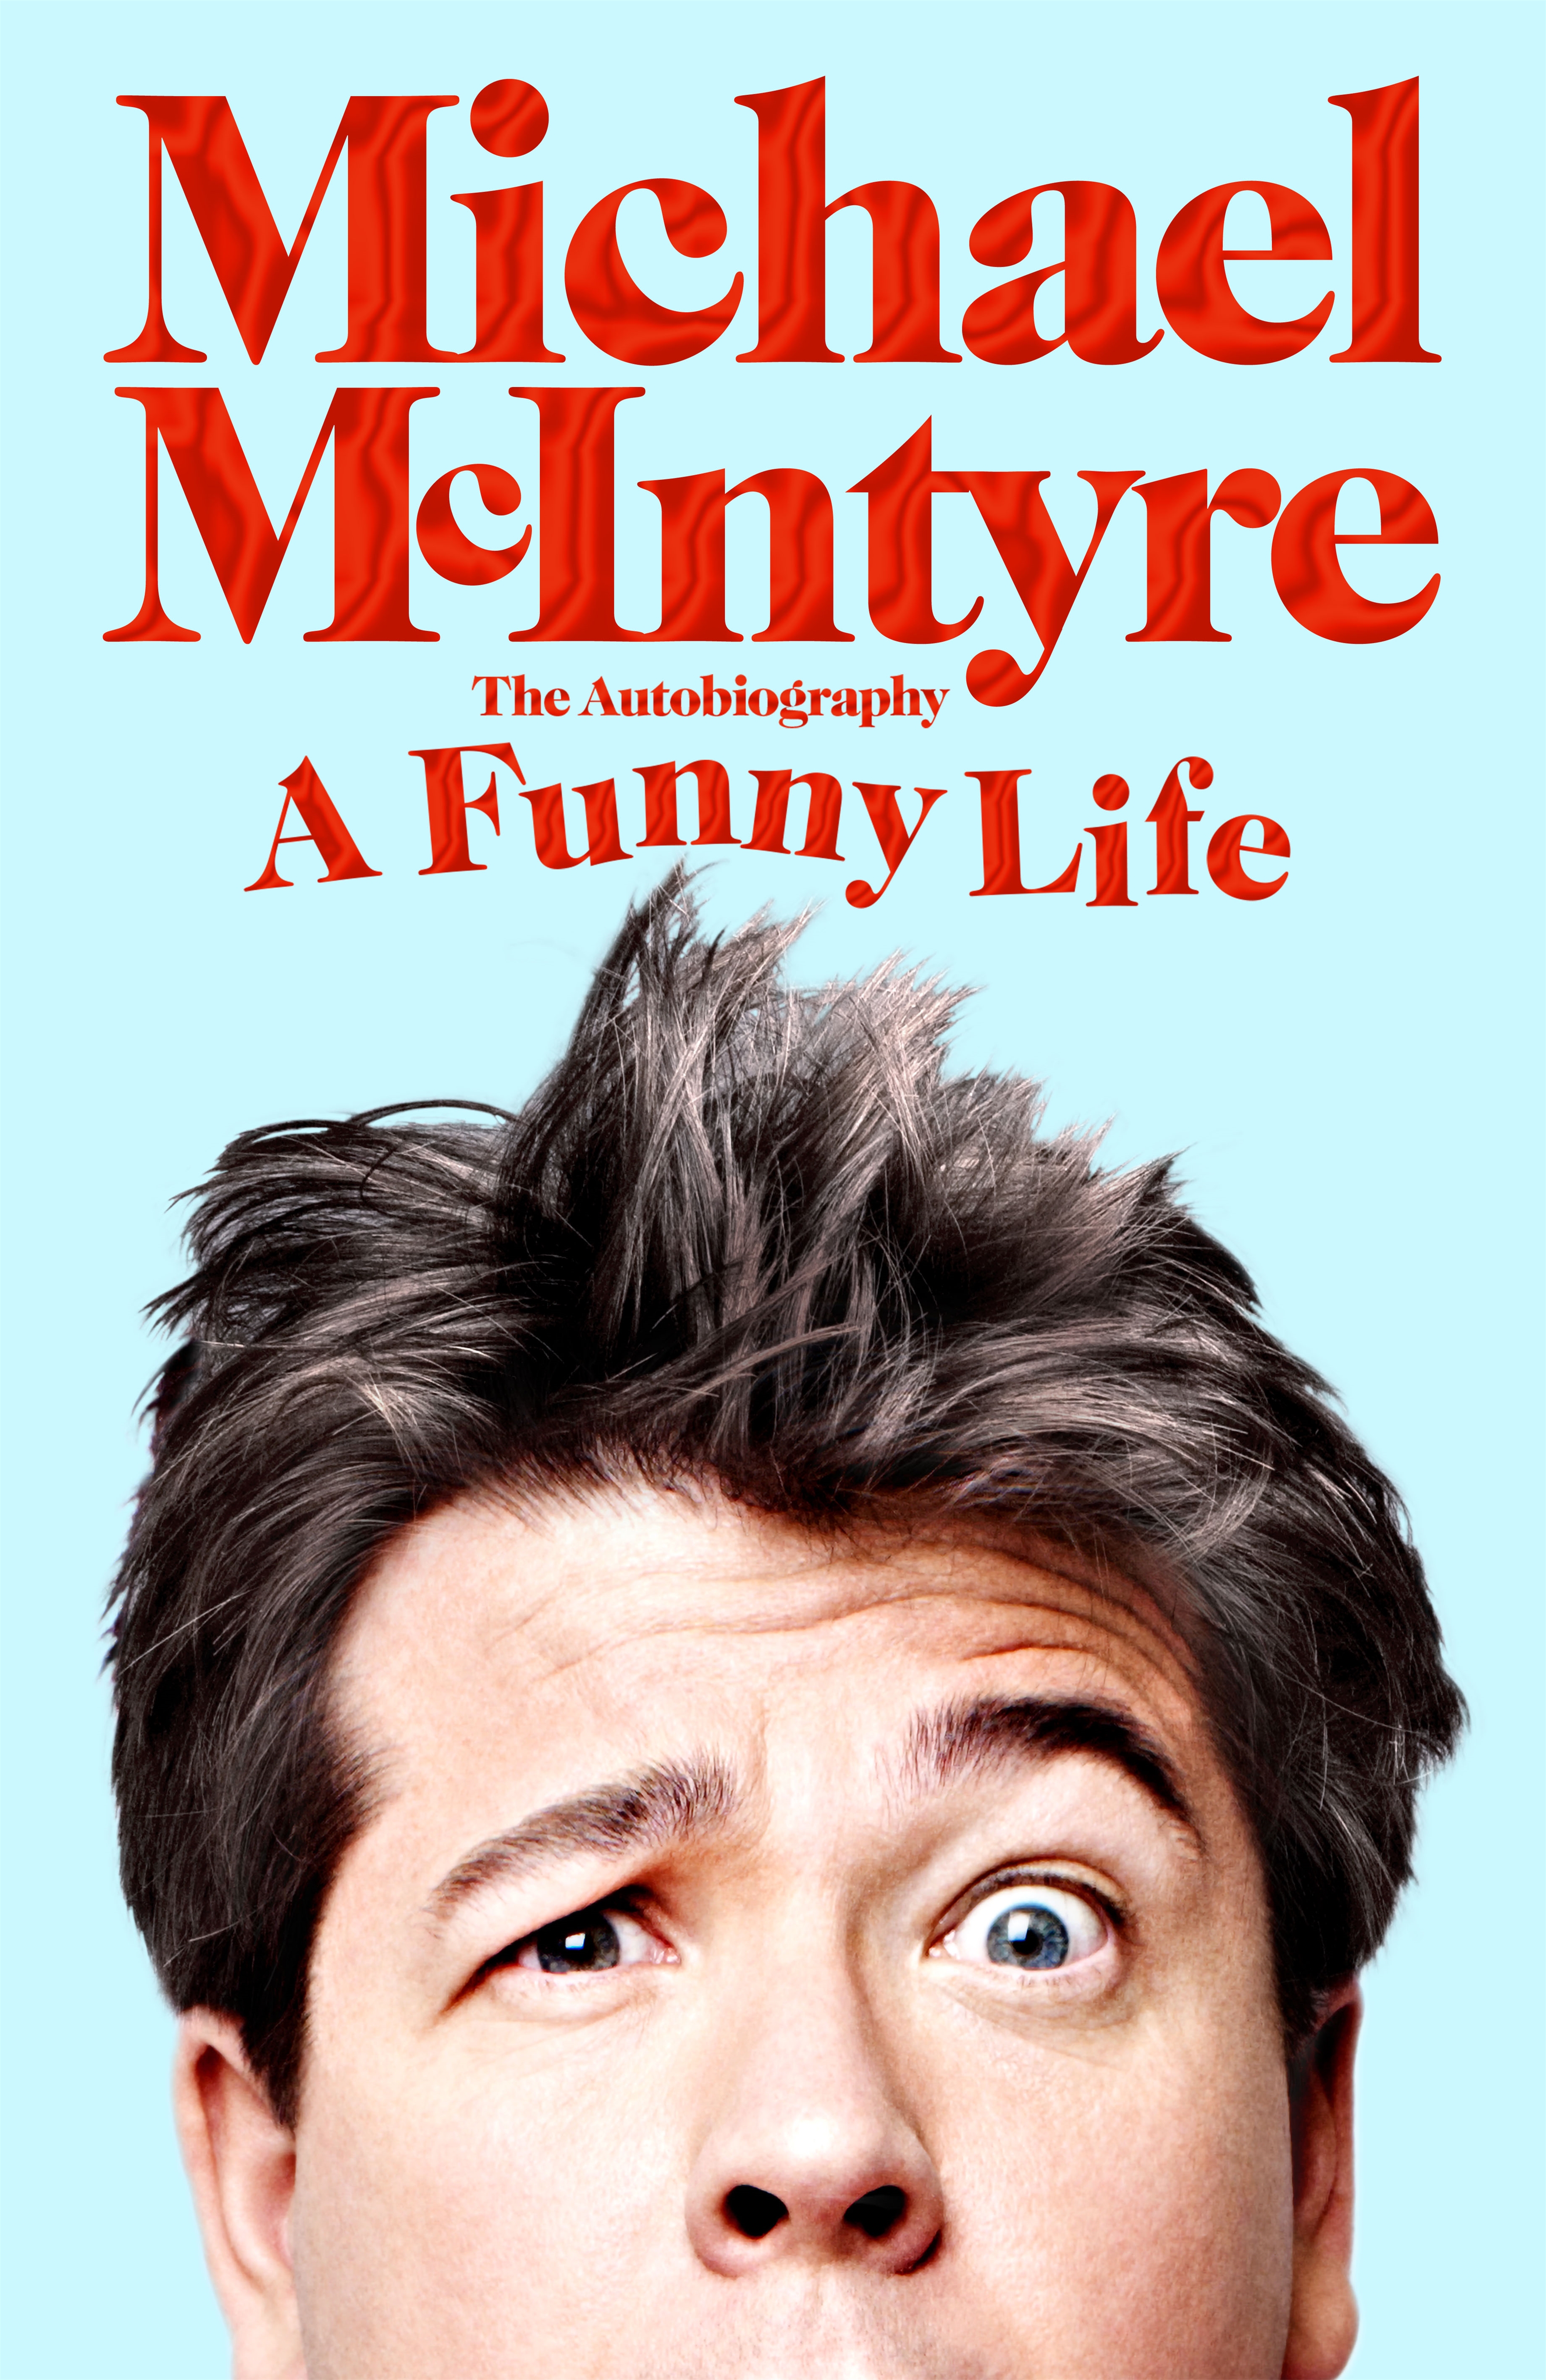 A Funny Life book cover image